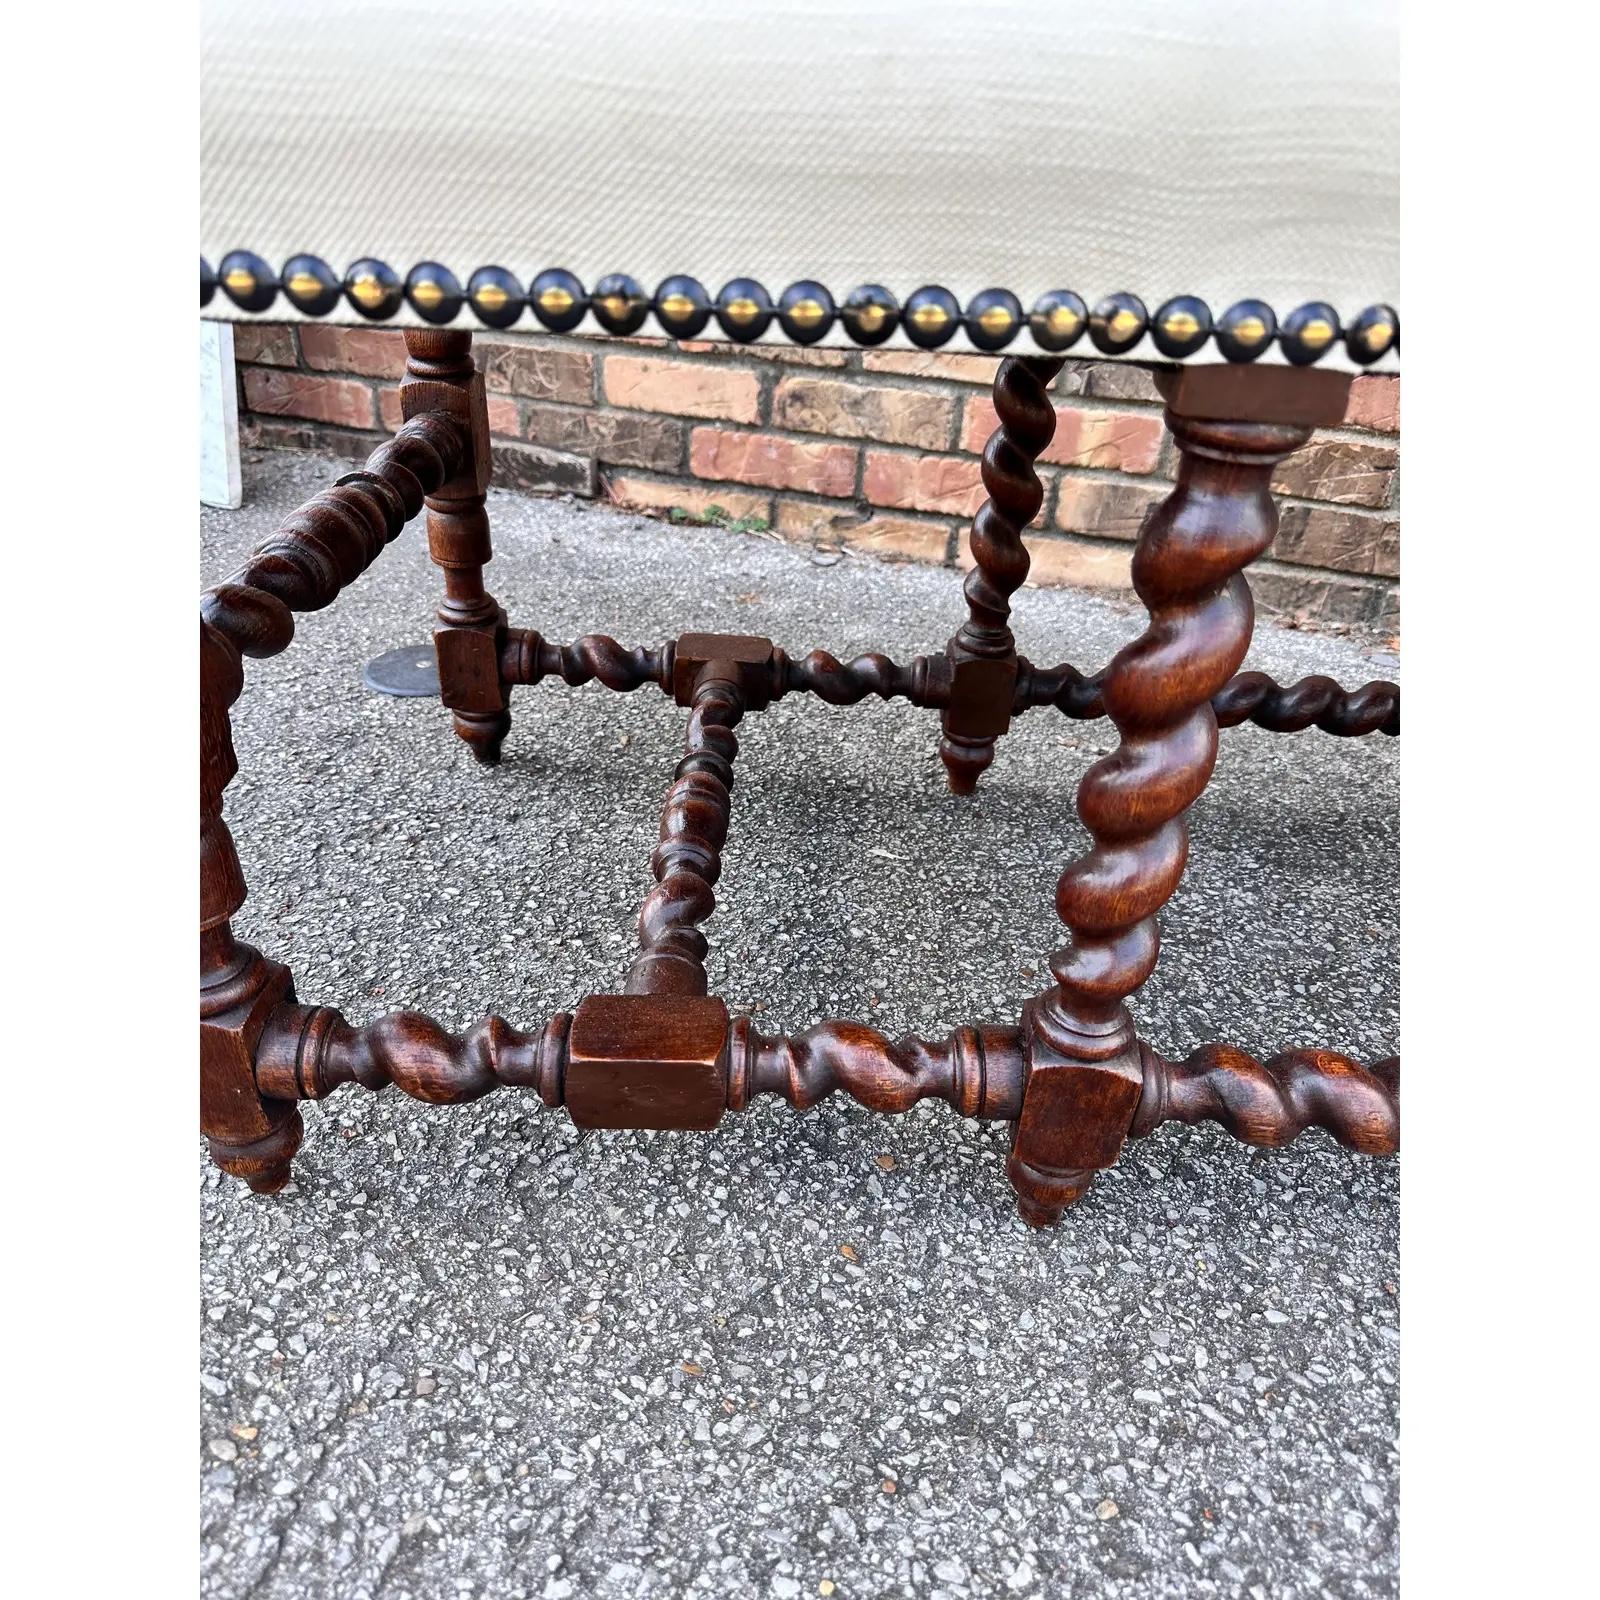 This is a beautifully Upholstered English bench the fabric is an off white or slight cream. The photo makes the benches appear whiter than they really are. However, it looks amazing paired with the dark wood. less. The barley twist legs really adds